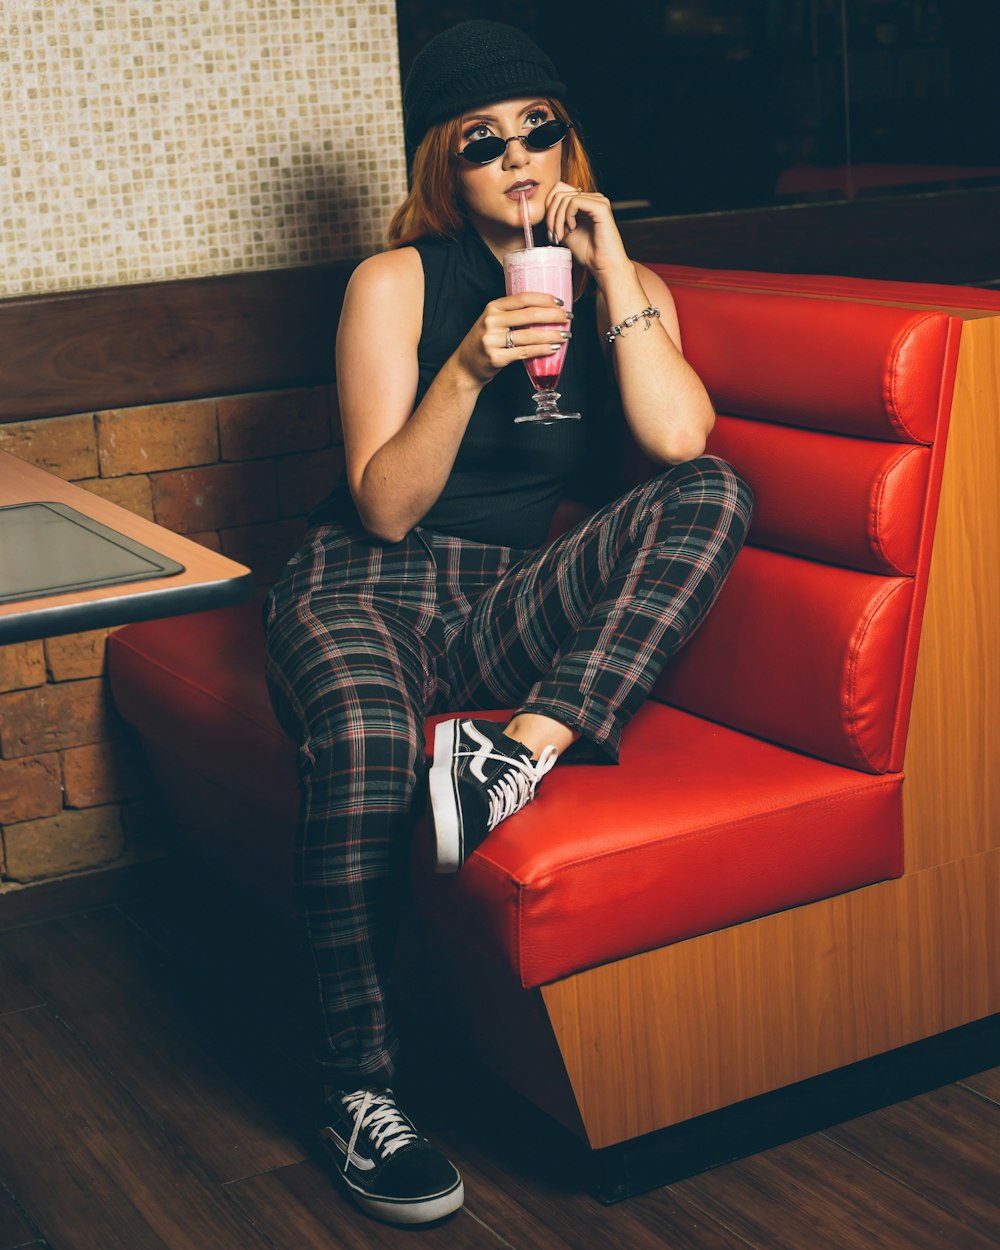 selective focus photography of sitting woman sipping drink